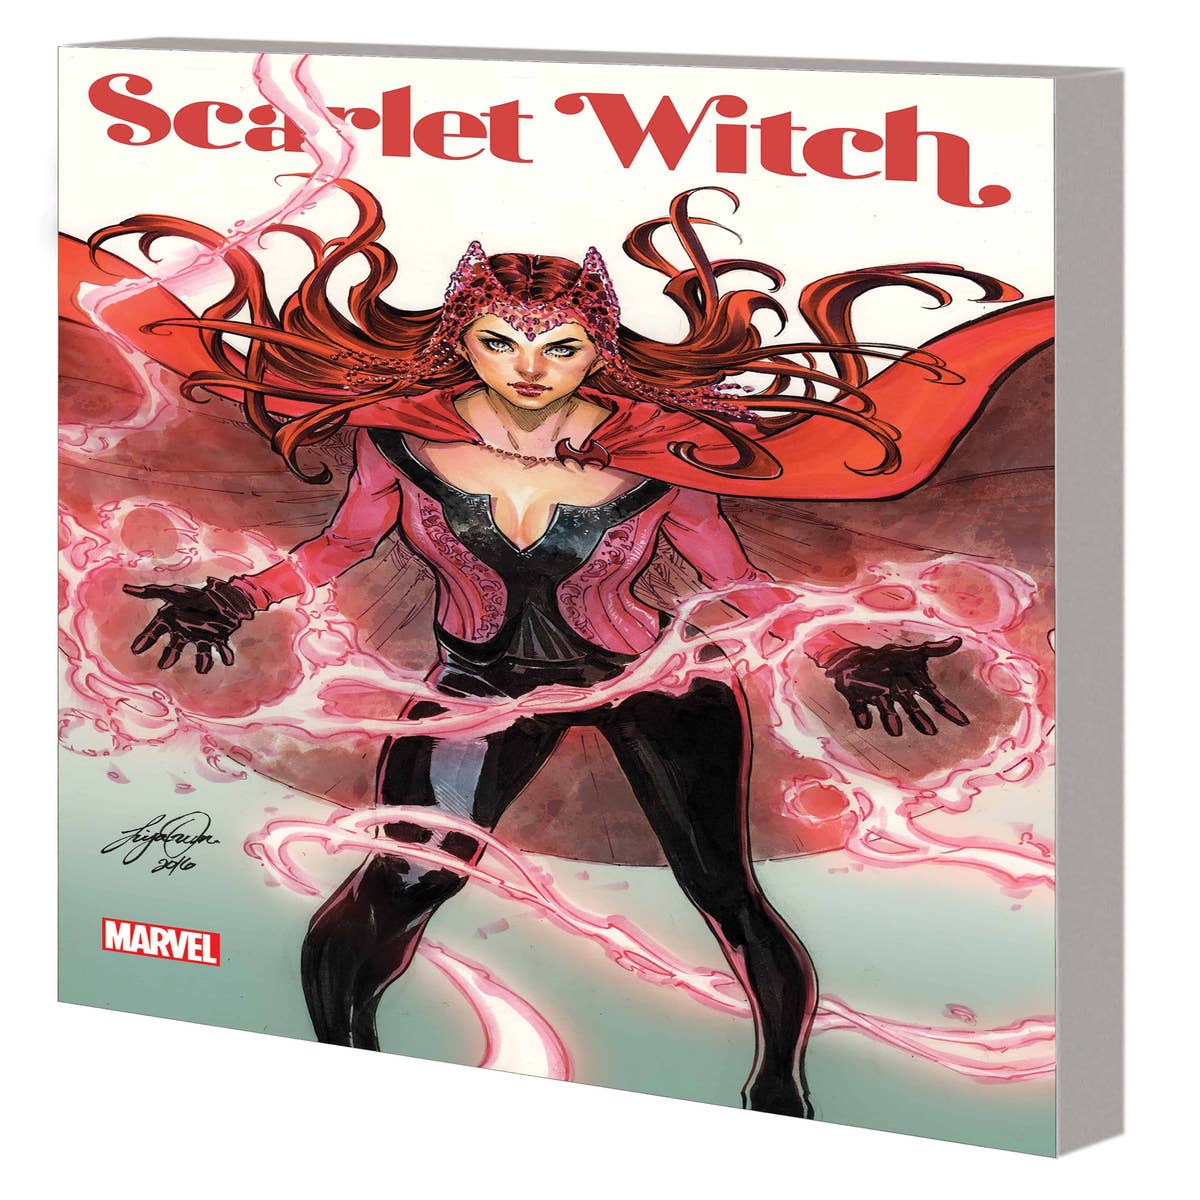 Vision And The Scarlet Witch V2 01  Read Vision And The Scarlet Witch V2  01 comic online in high quality. Read Full Comic online for free - Read  comics online in